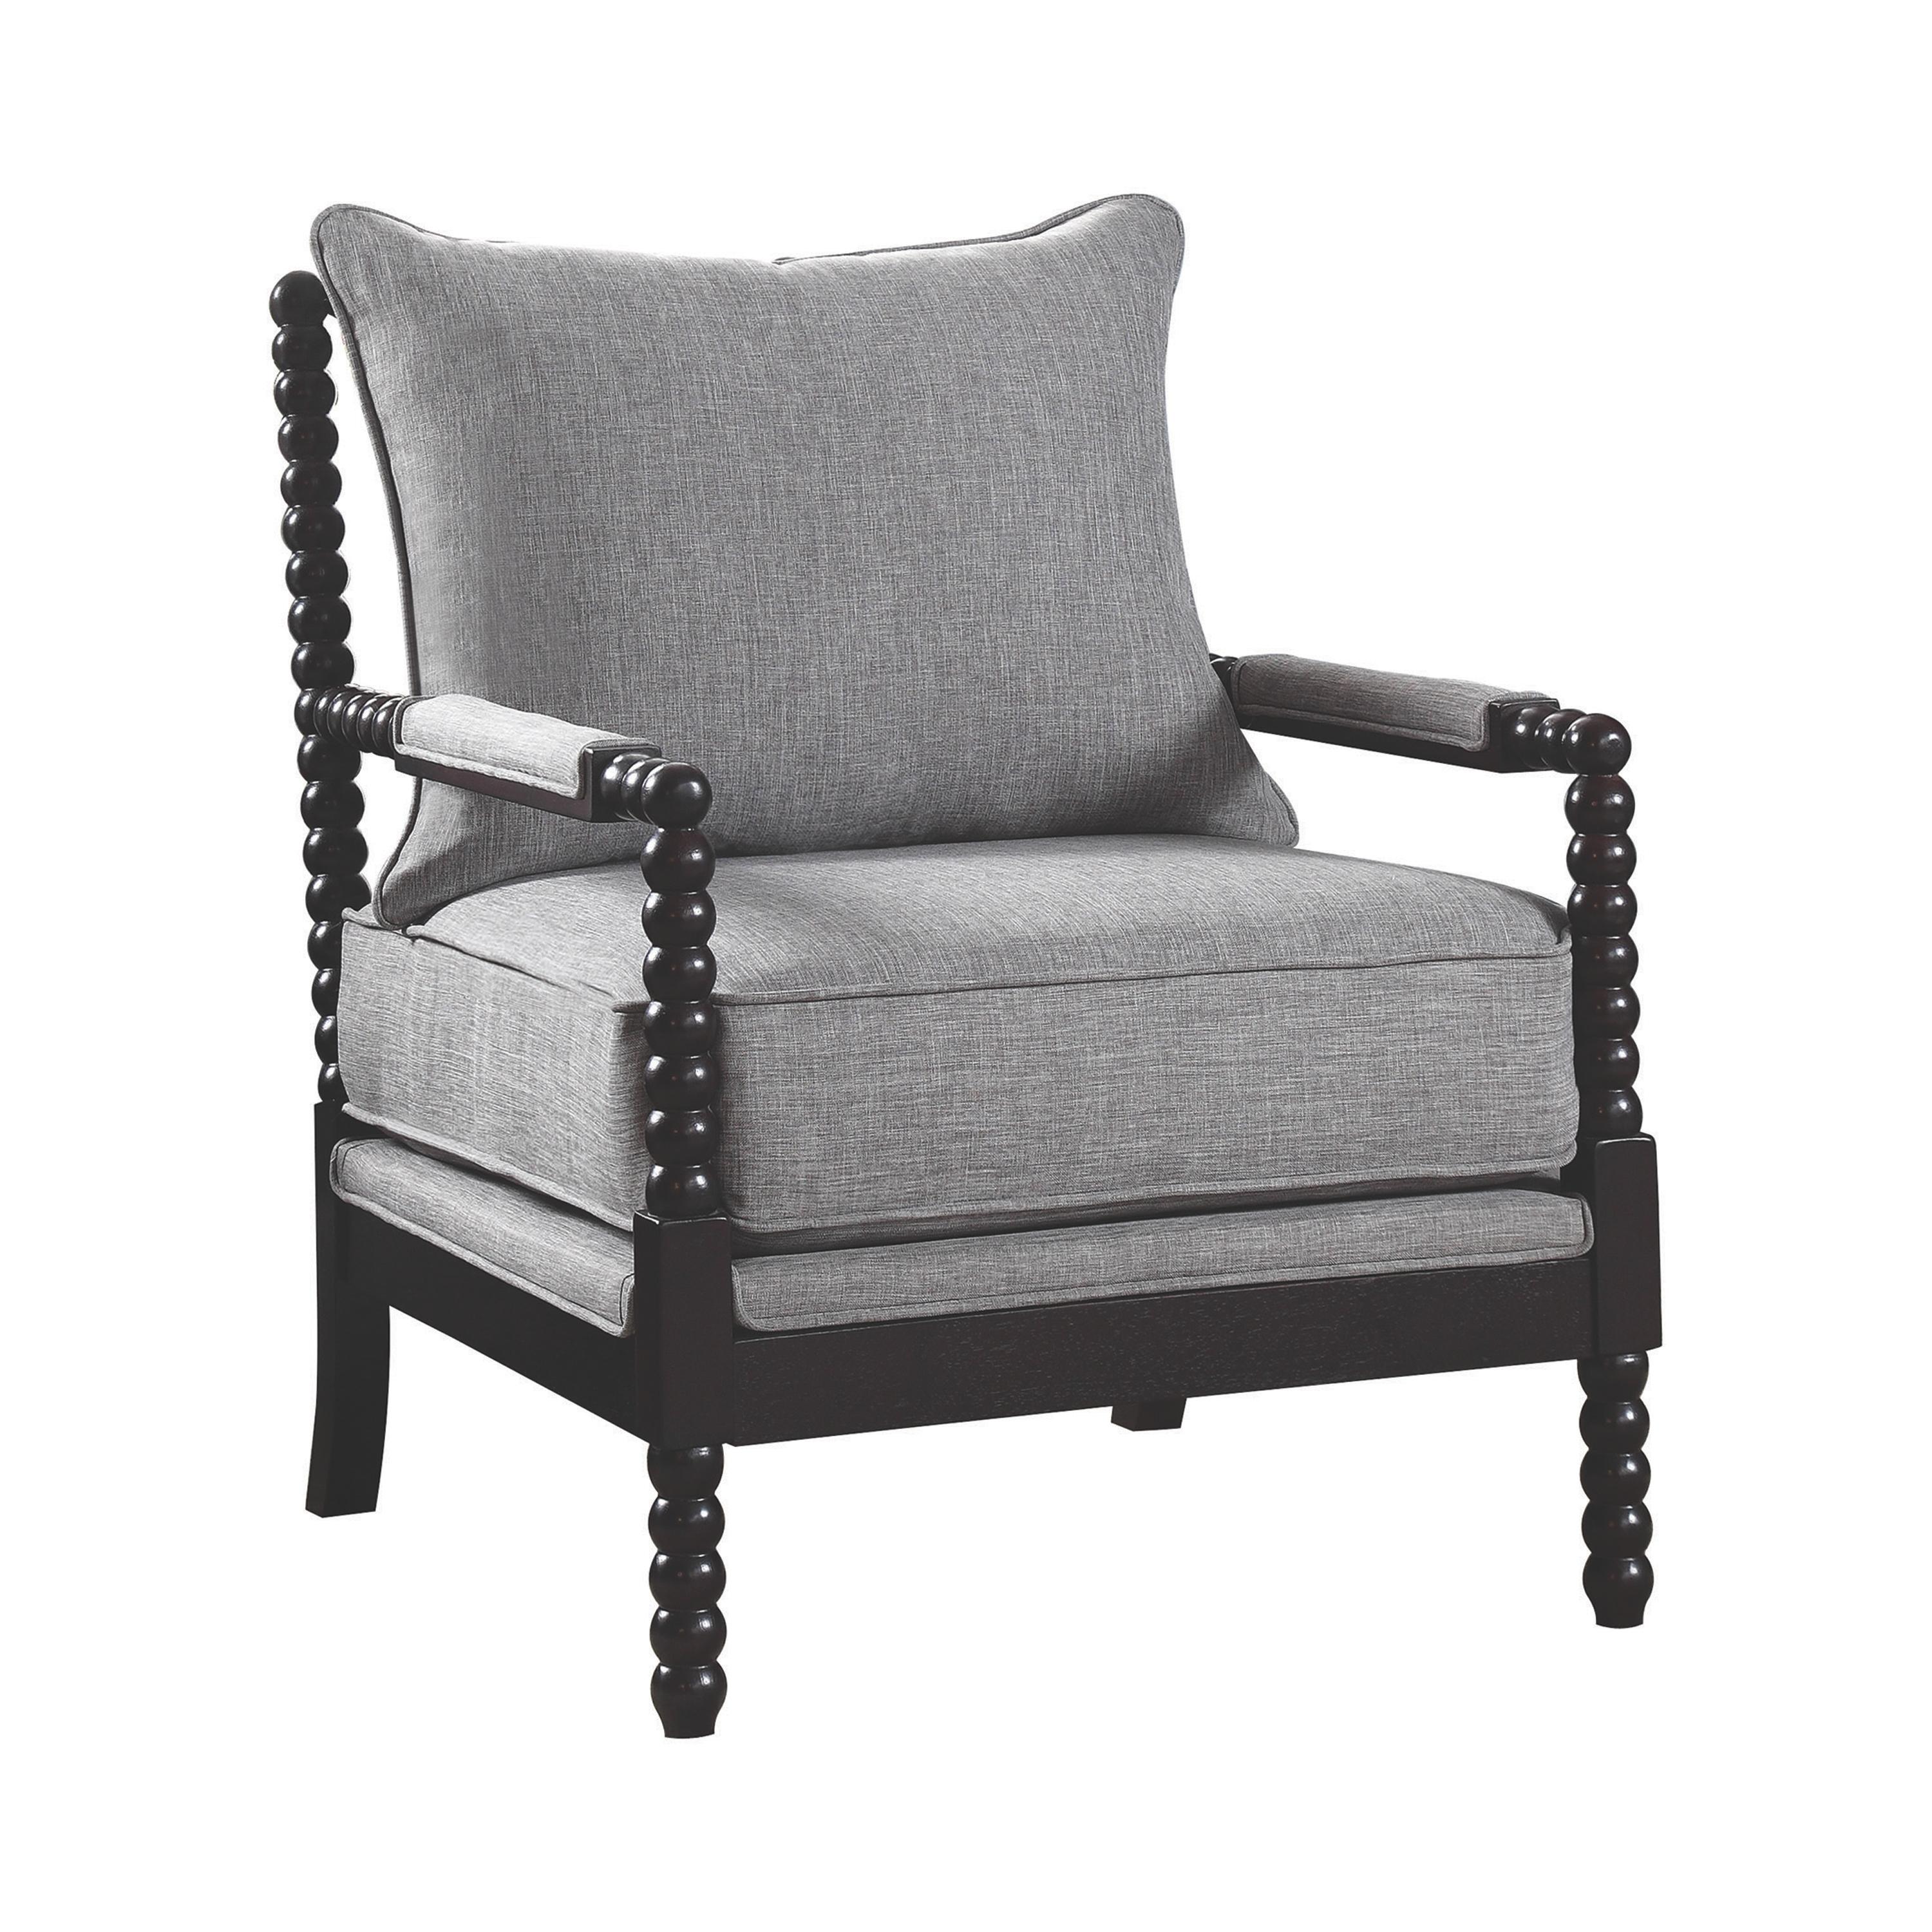 Transitional Accent Chair 903824 903824 in Gray 